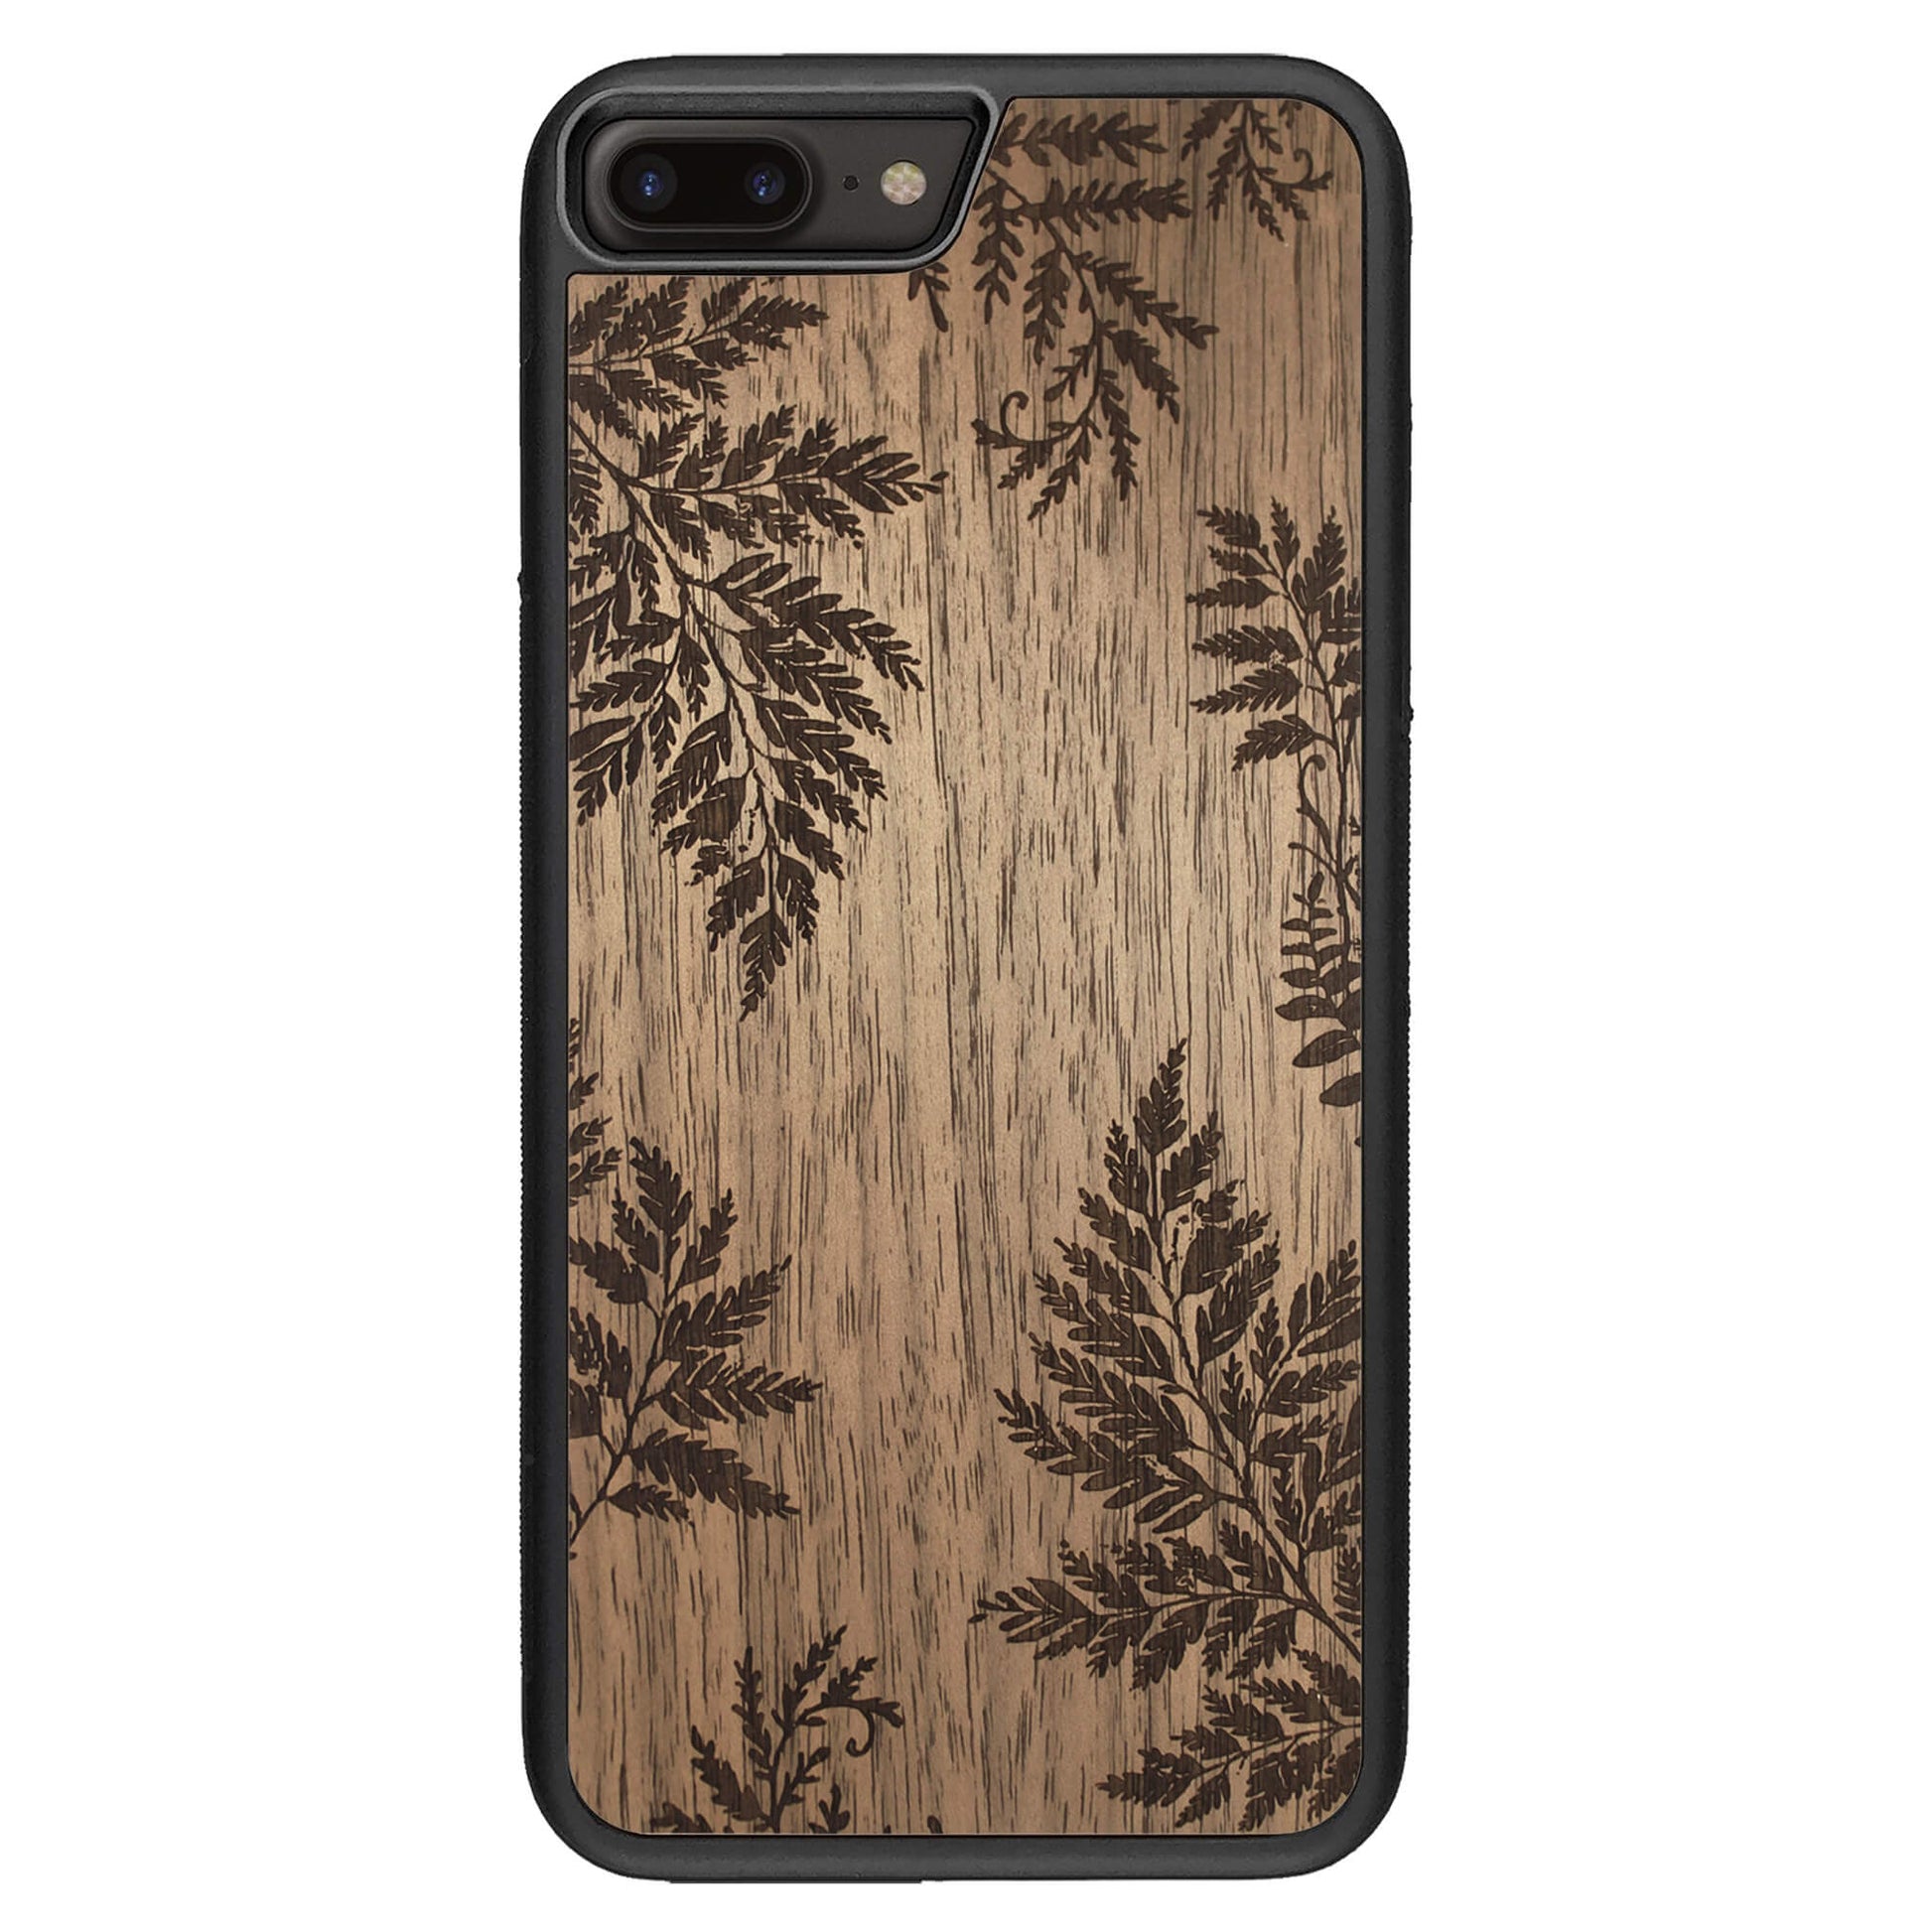 Wooden Case for iPhone 7 Plus Botanical Fern